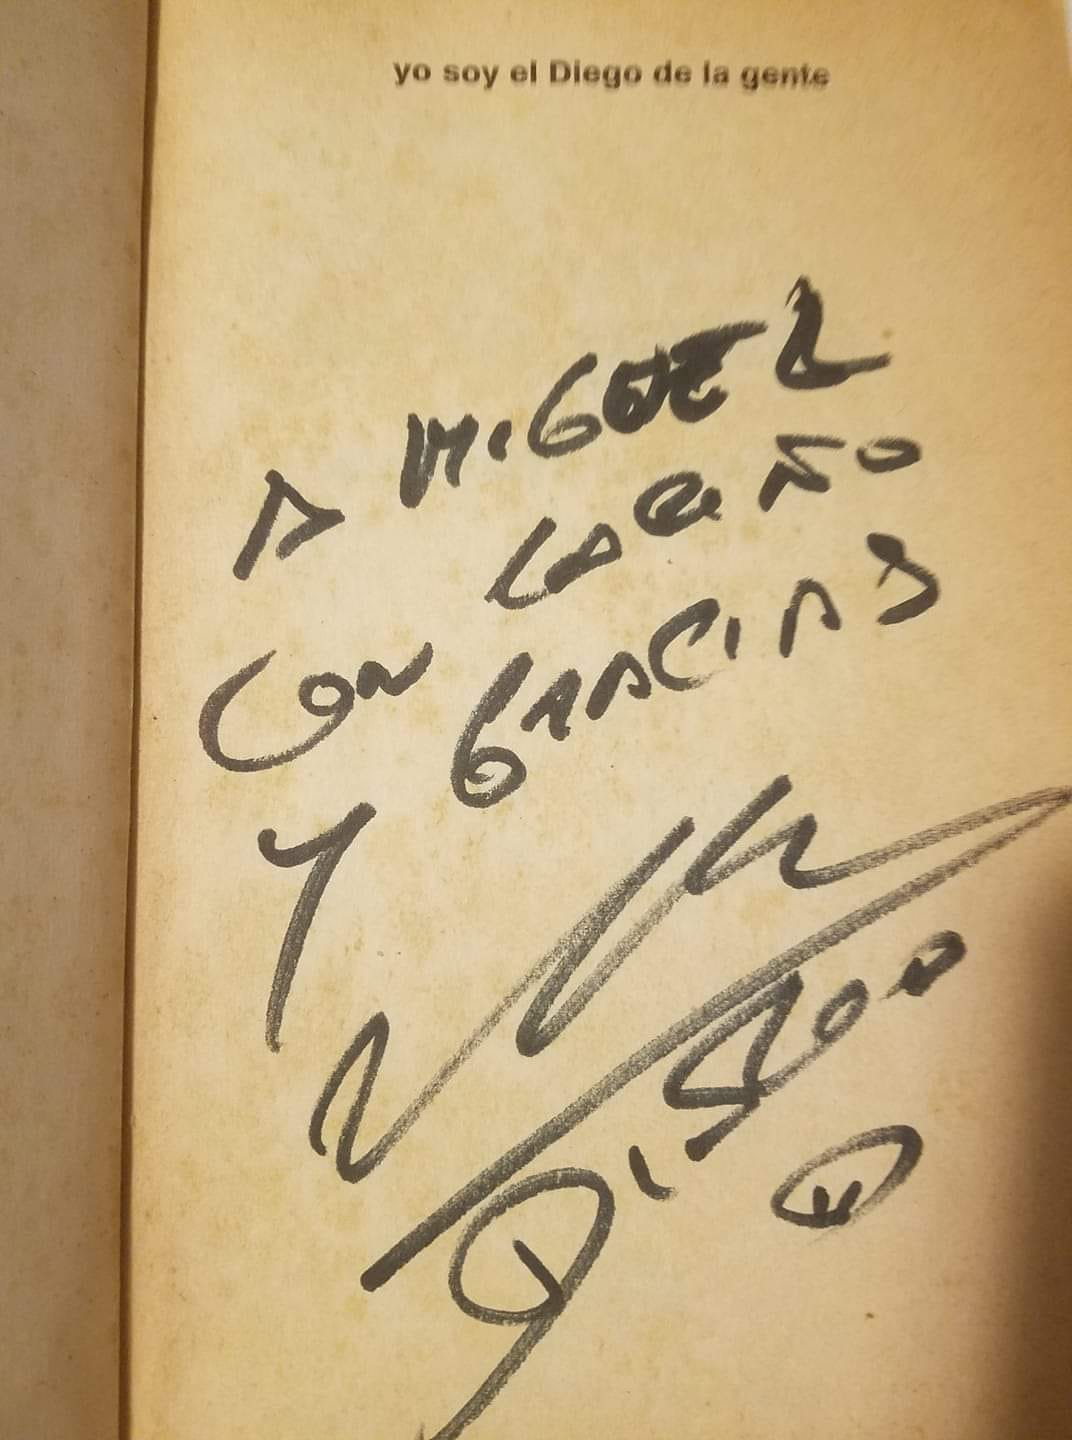 The book, autographed by Maradona for Miguel Hernández.